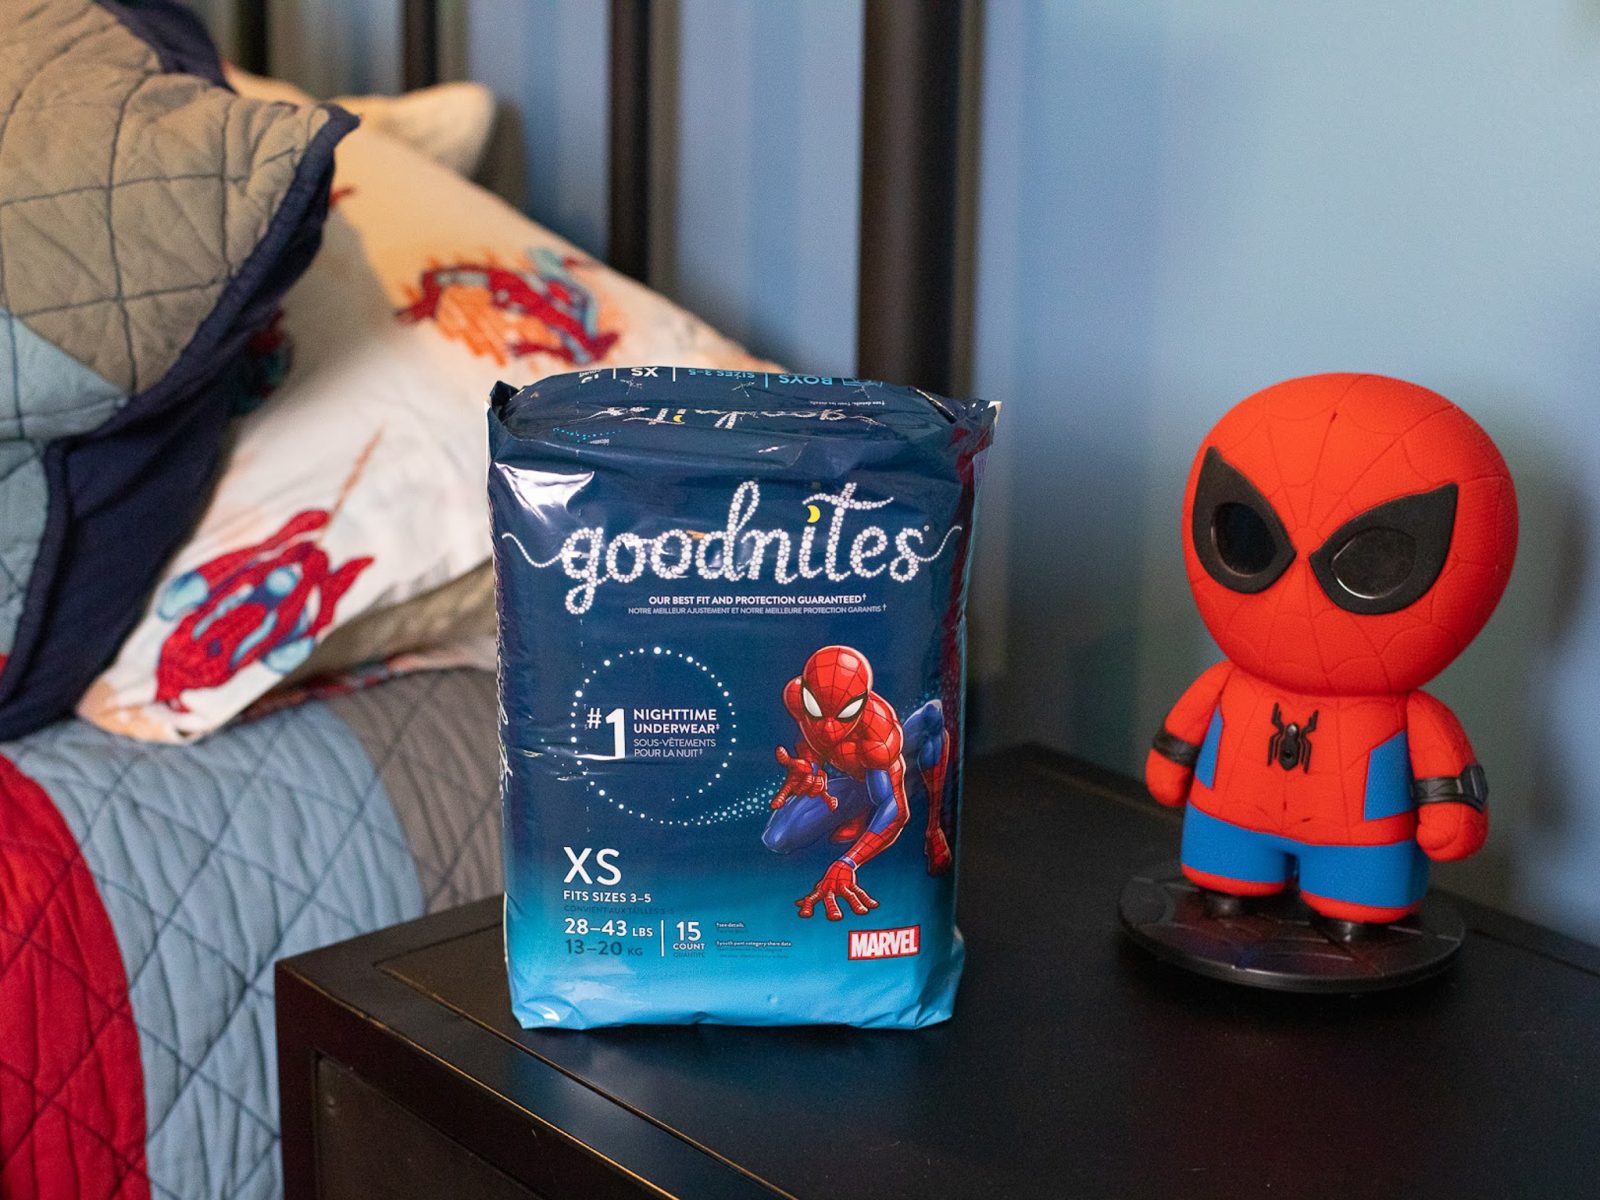 Save Over $5 On A Pack Of Goodnites Nighttime Underwear At Publix